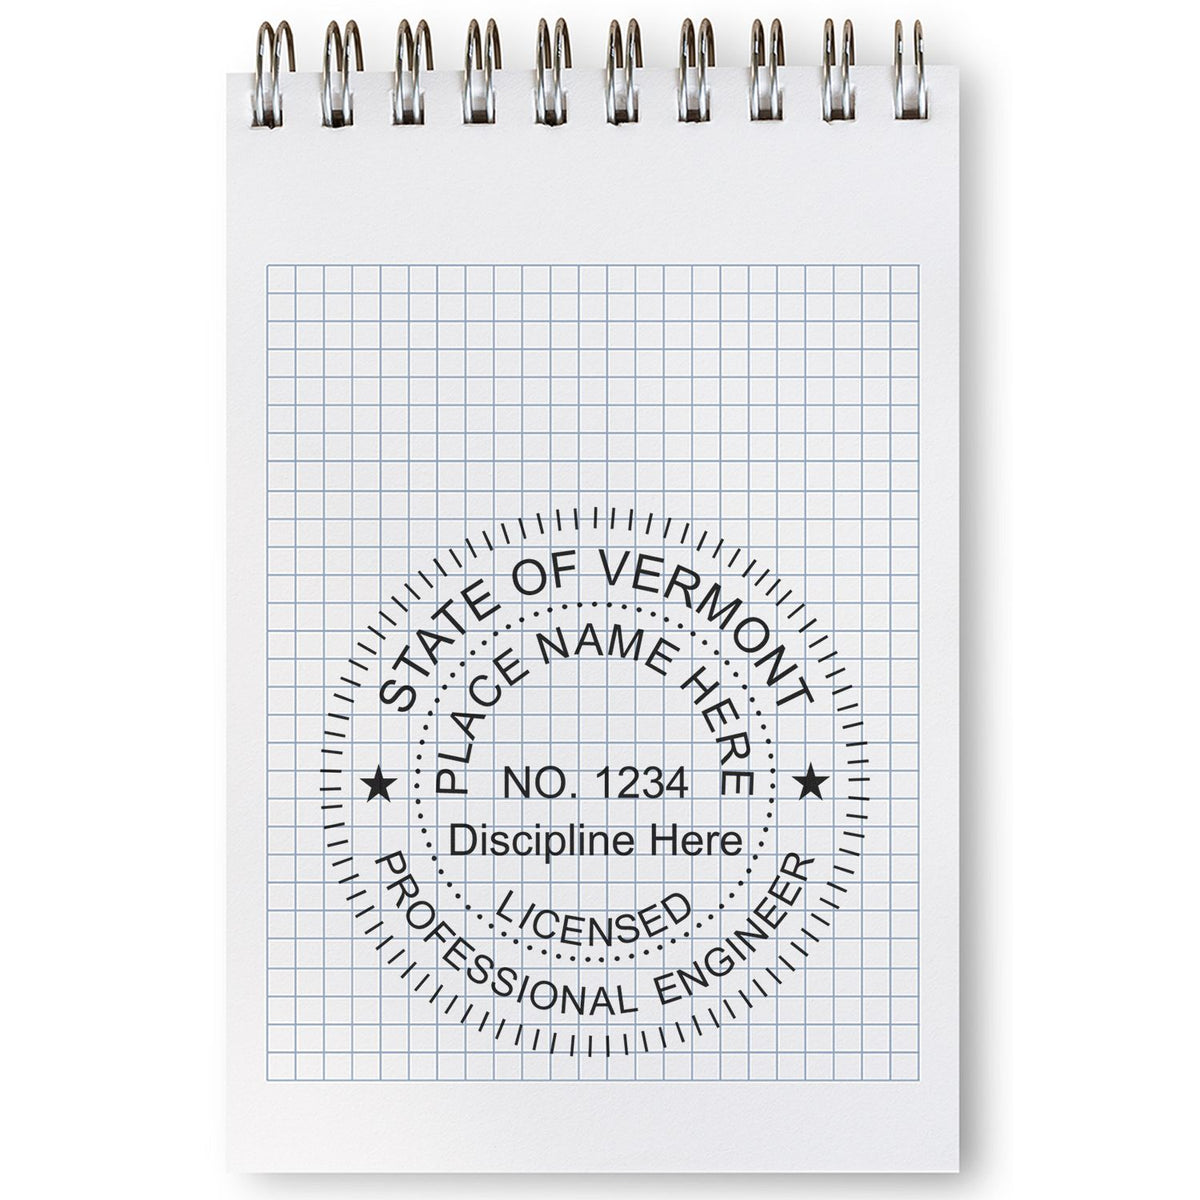 A stamped impression of the Self-Inking Vermont PE Stamp in this stylish lifestyle photo, setting the tone for a unique and personalized product.